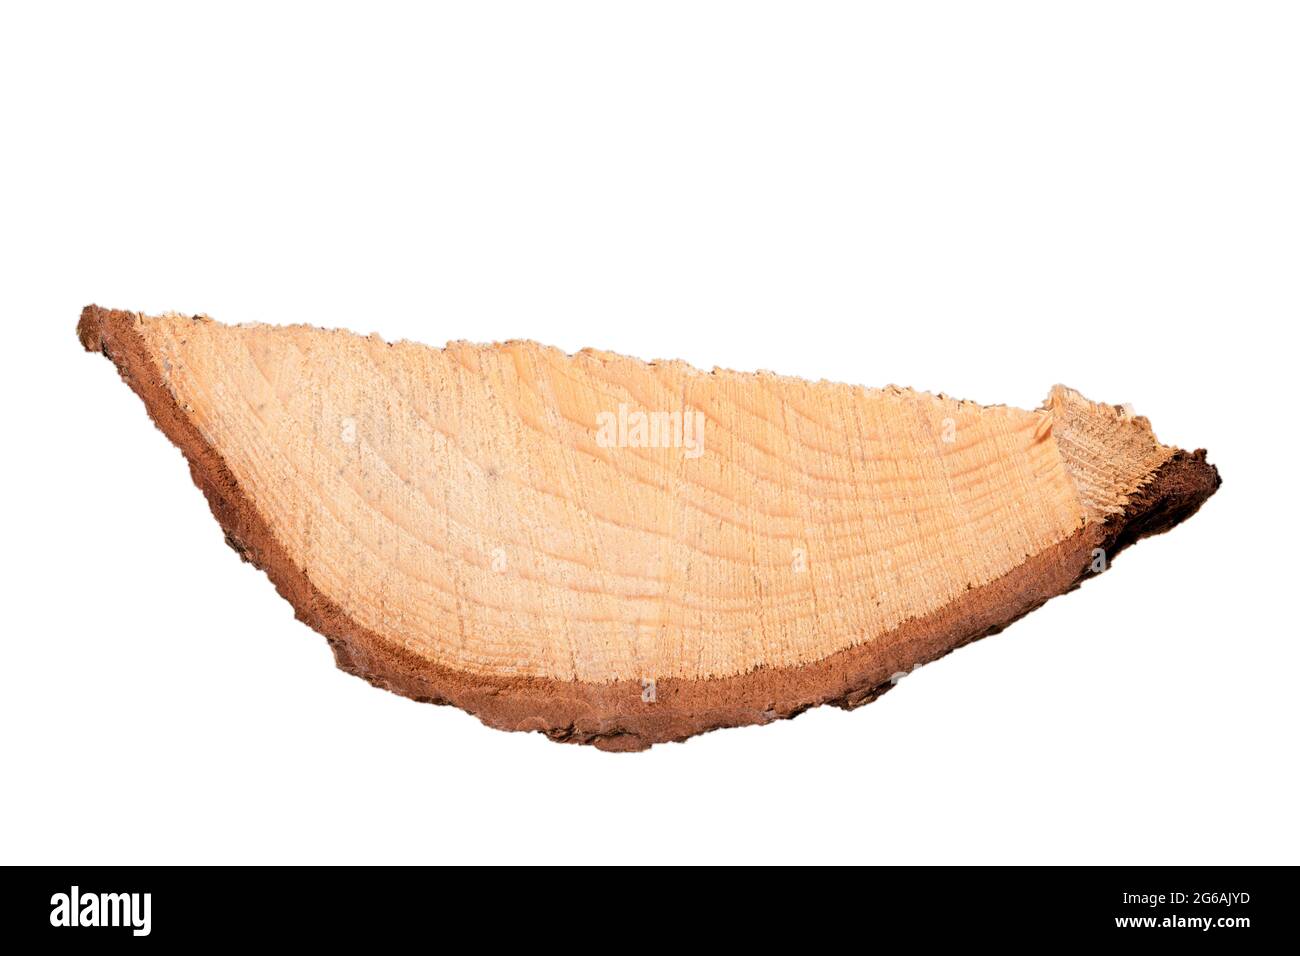 Piece of coniferous wood with visible bark. Material for the manufacture of furniture. Isolated background. Stock Photo